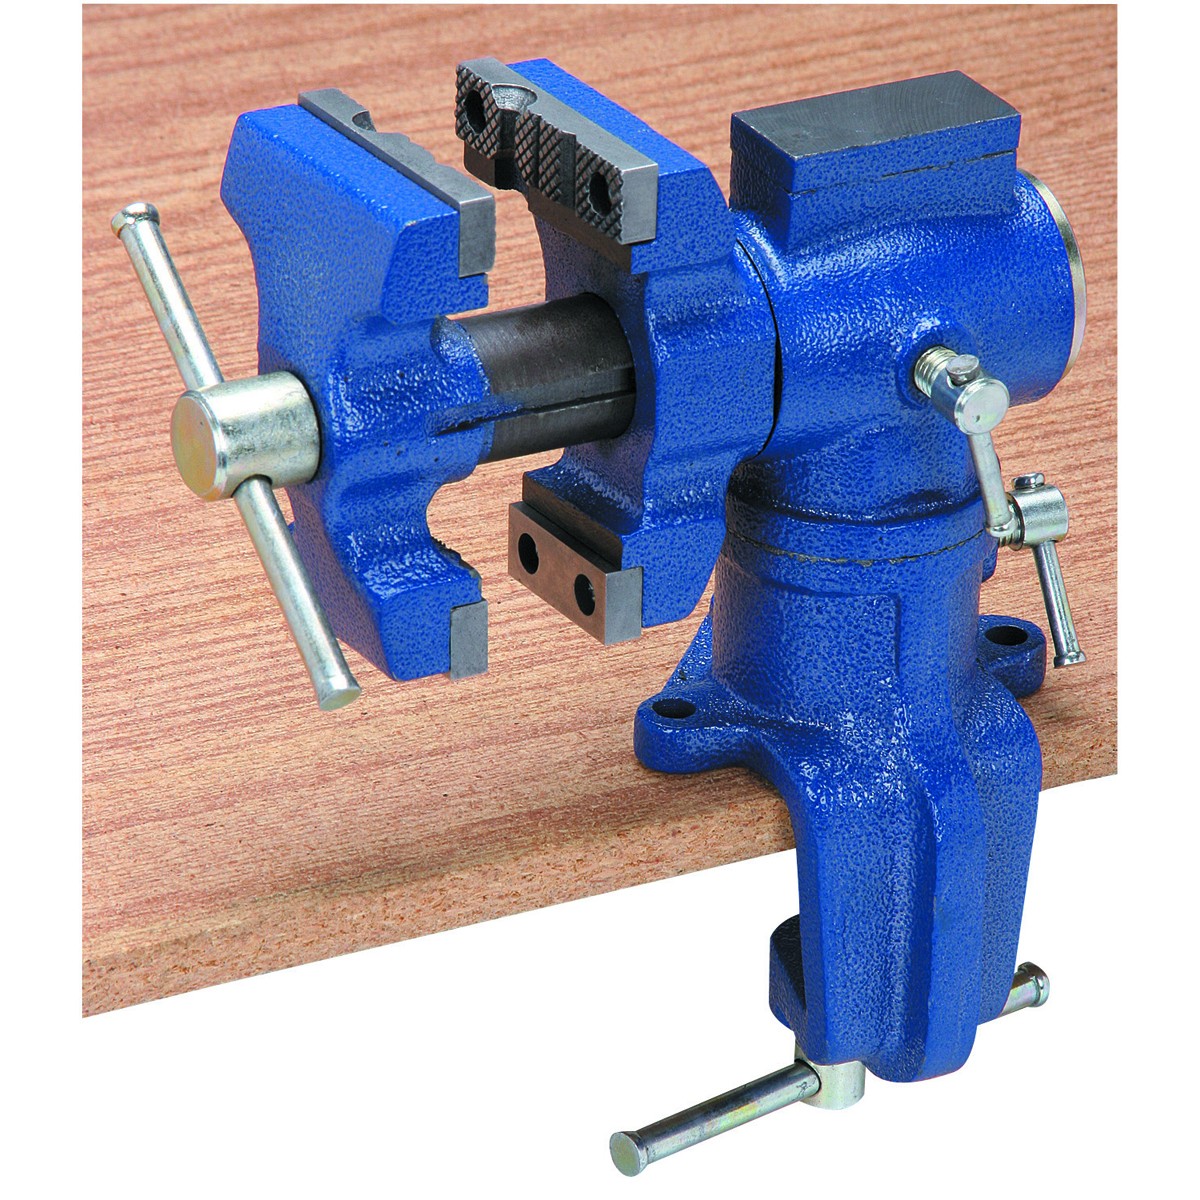 Durable 360° Bench Vice 4 Inch Workshop Clamp Engineers 110mm Jaw Workshop Heavy Duty Yosoo Bench Vise